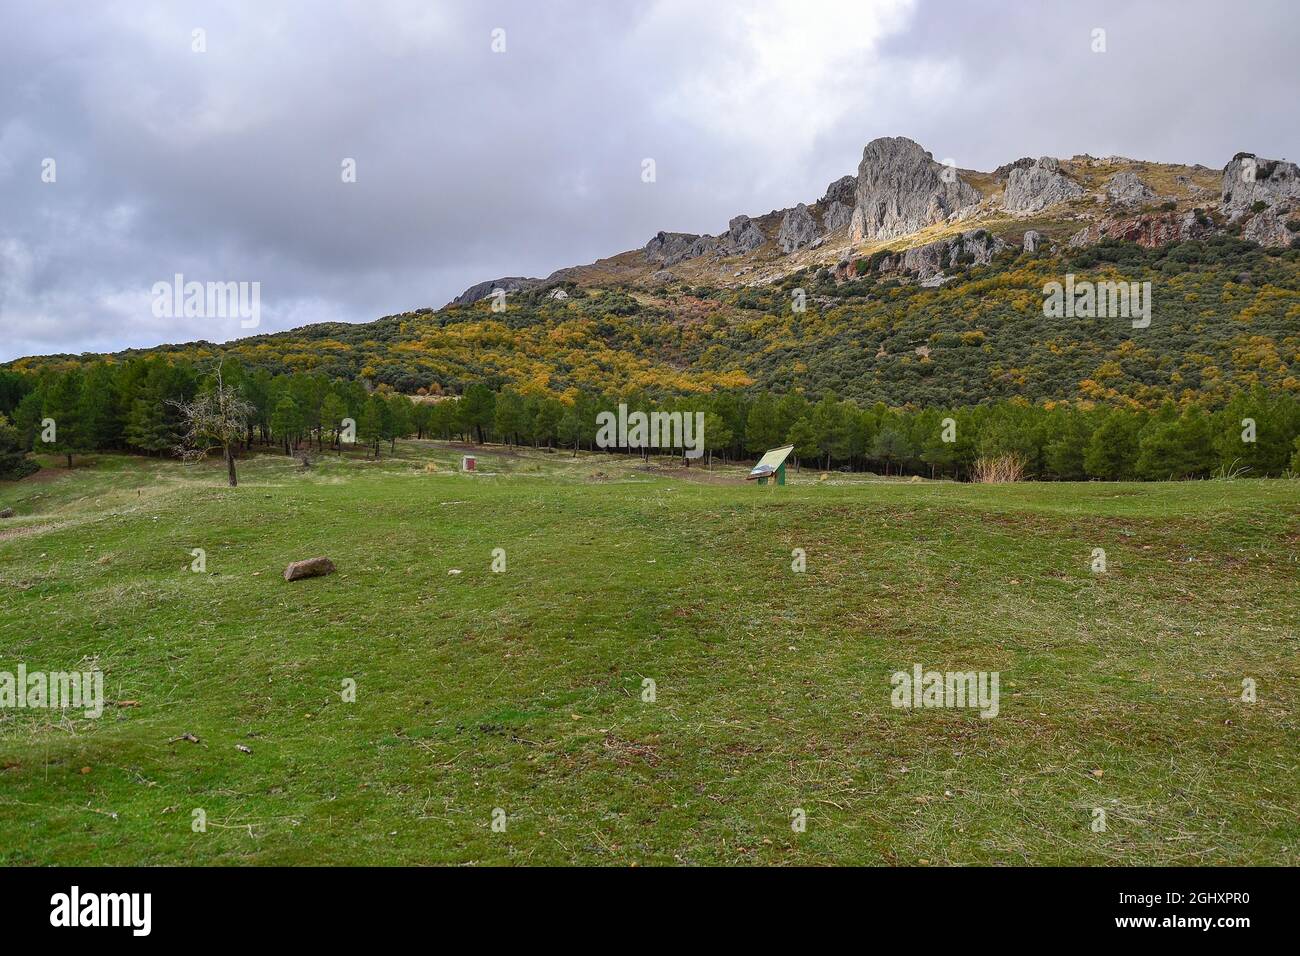 esplanade with green grass, a forest below and mountains in the background on a cloudy autumn day Stock Photo